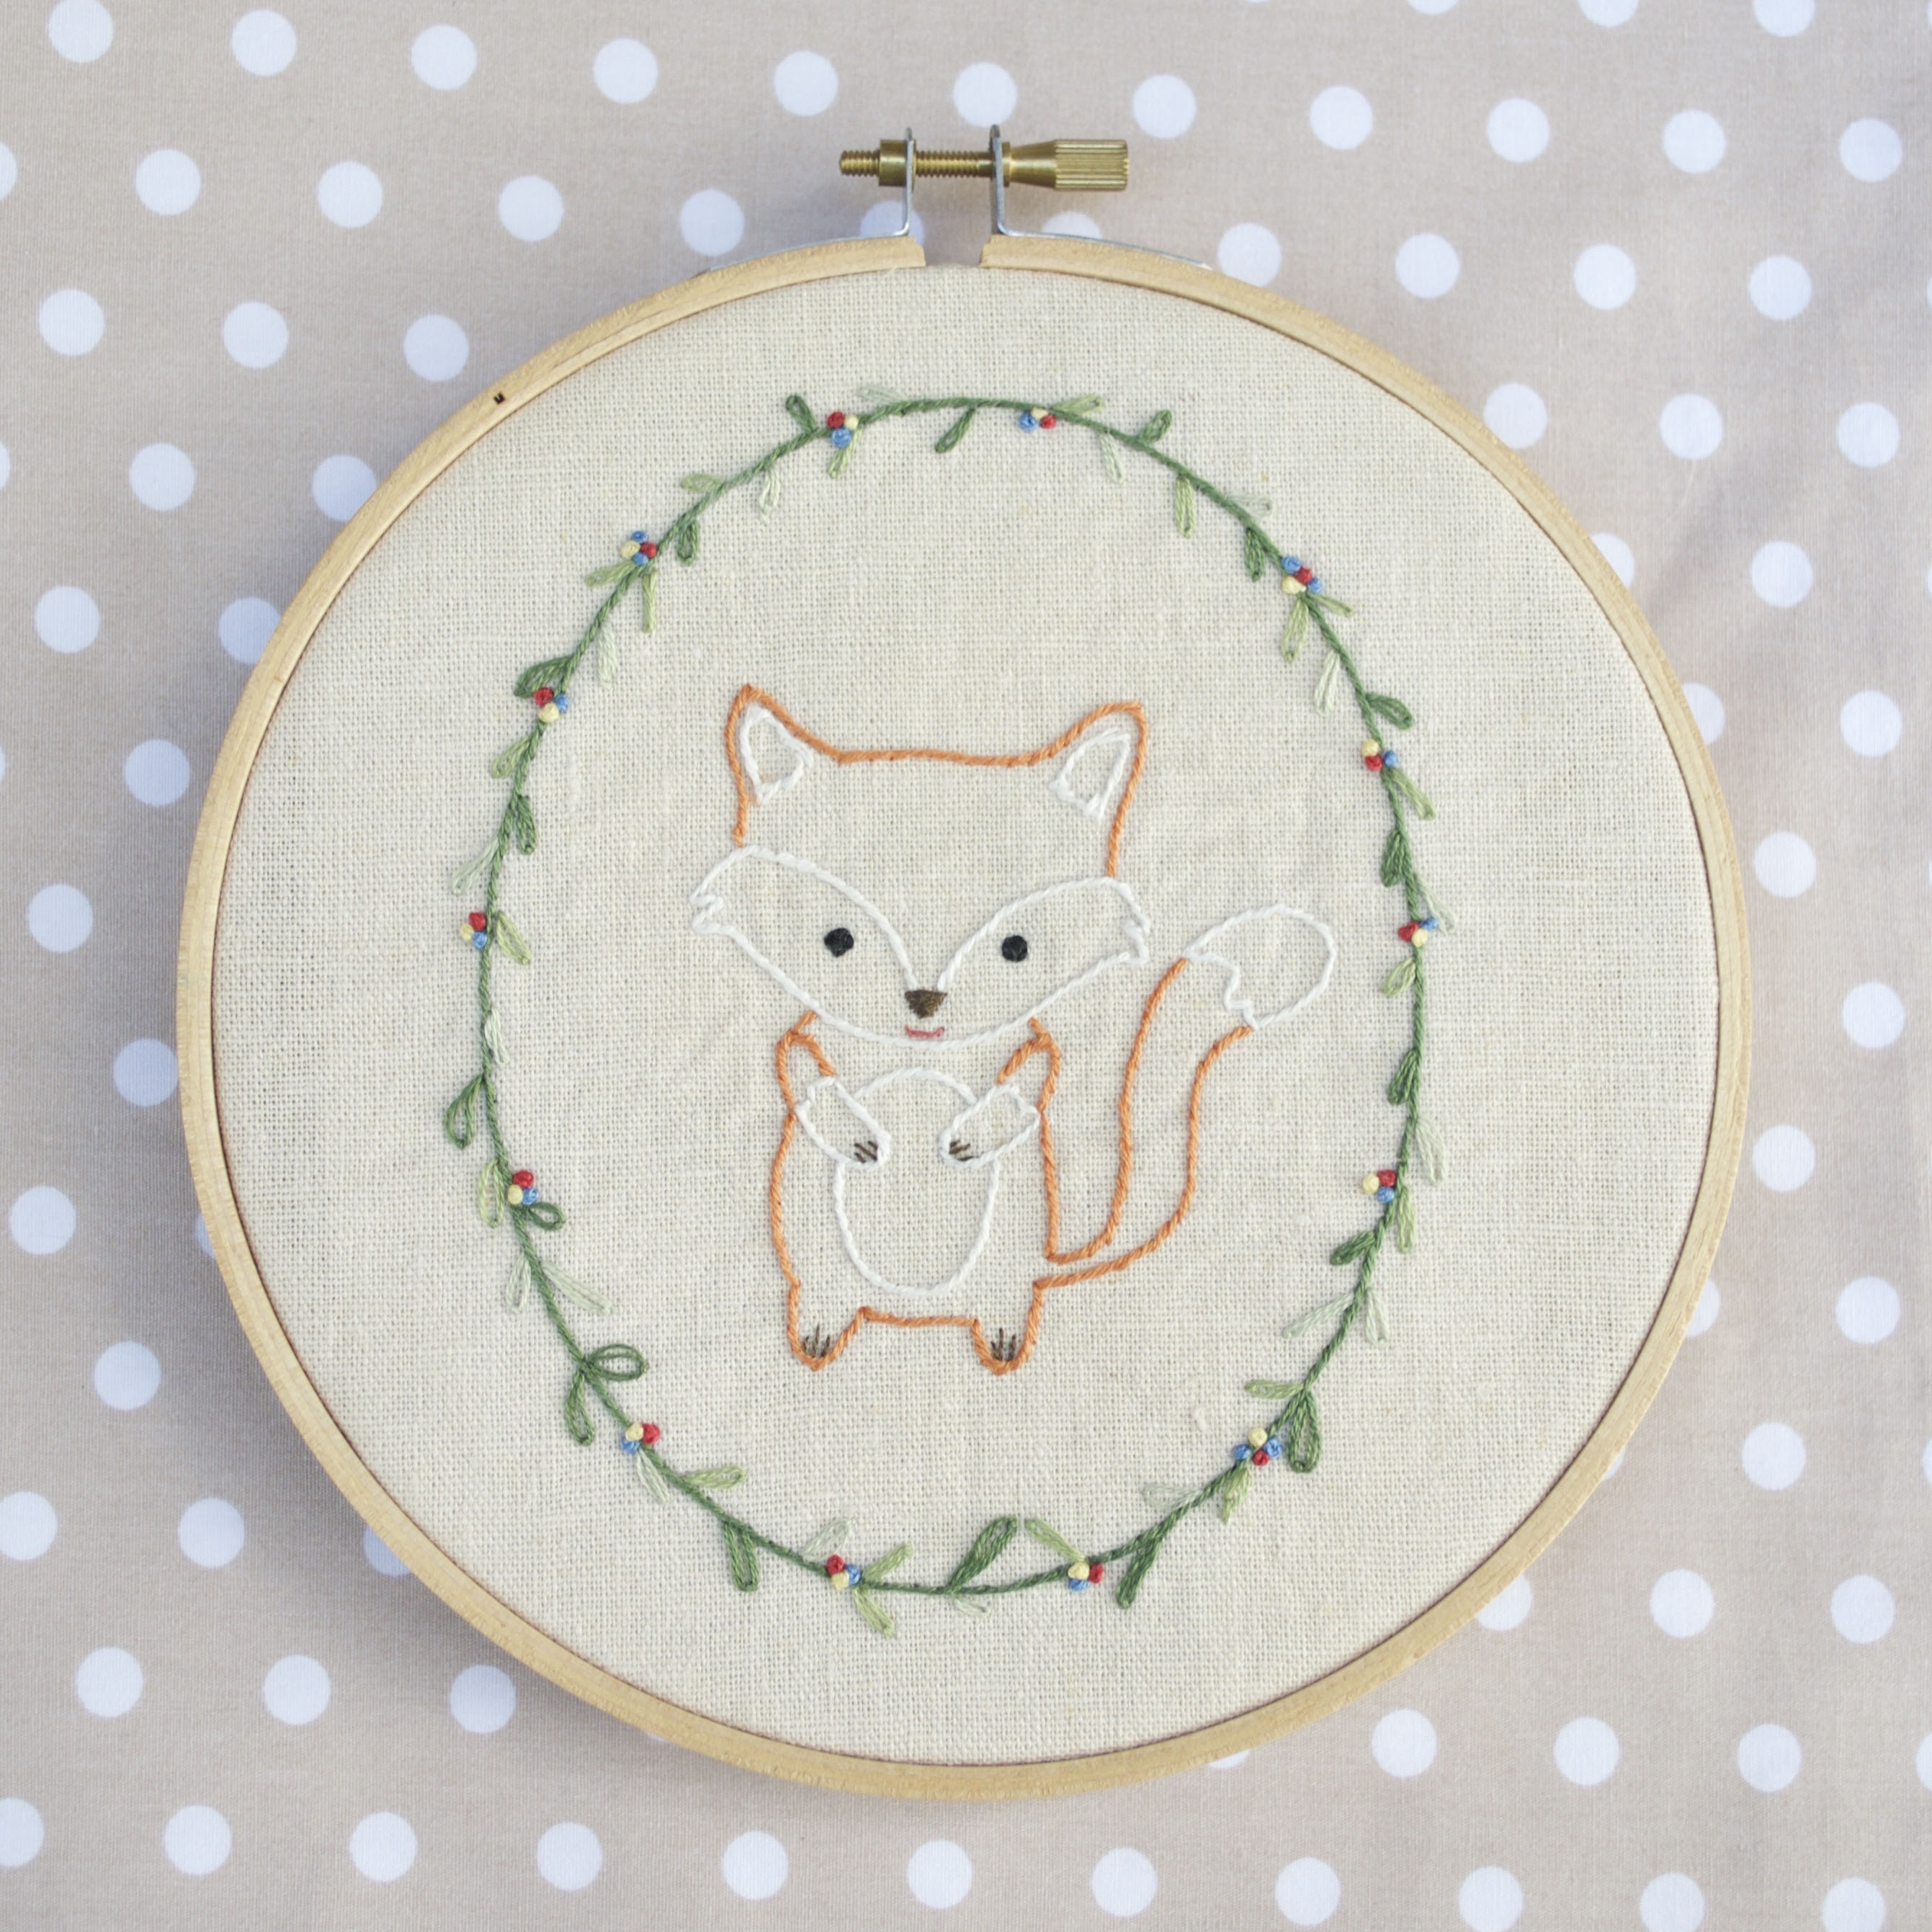 New Hand Embroidery Patterns Little Fox Hand Embroidery Pdf Pattern Instructions